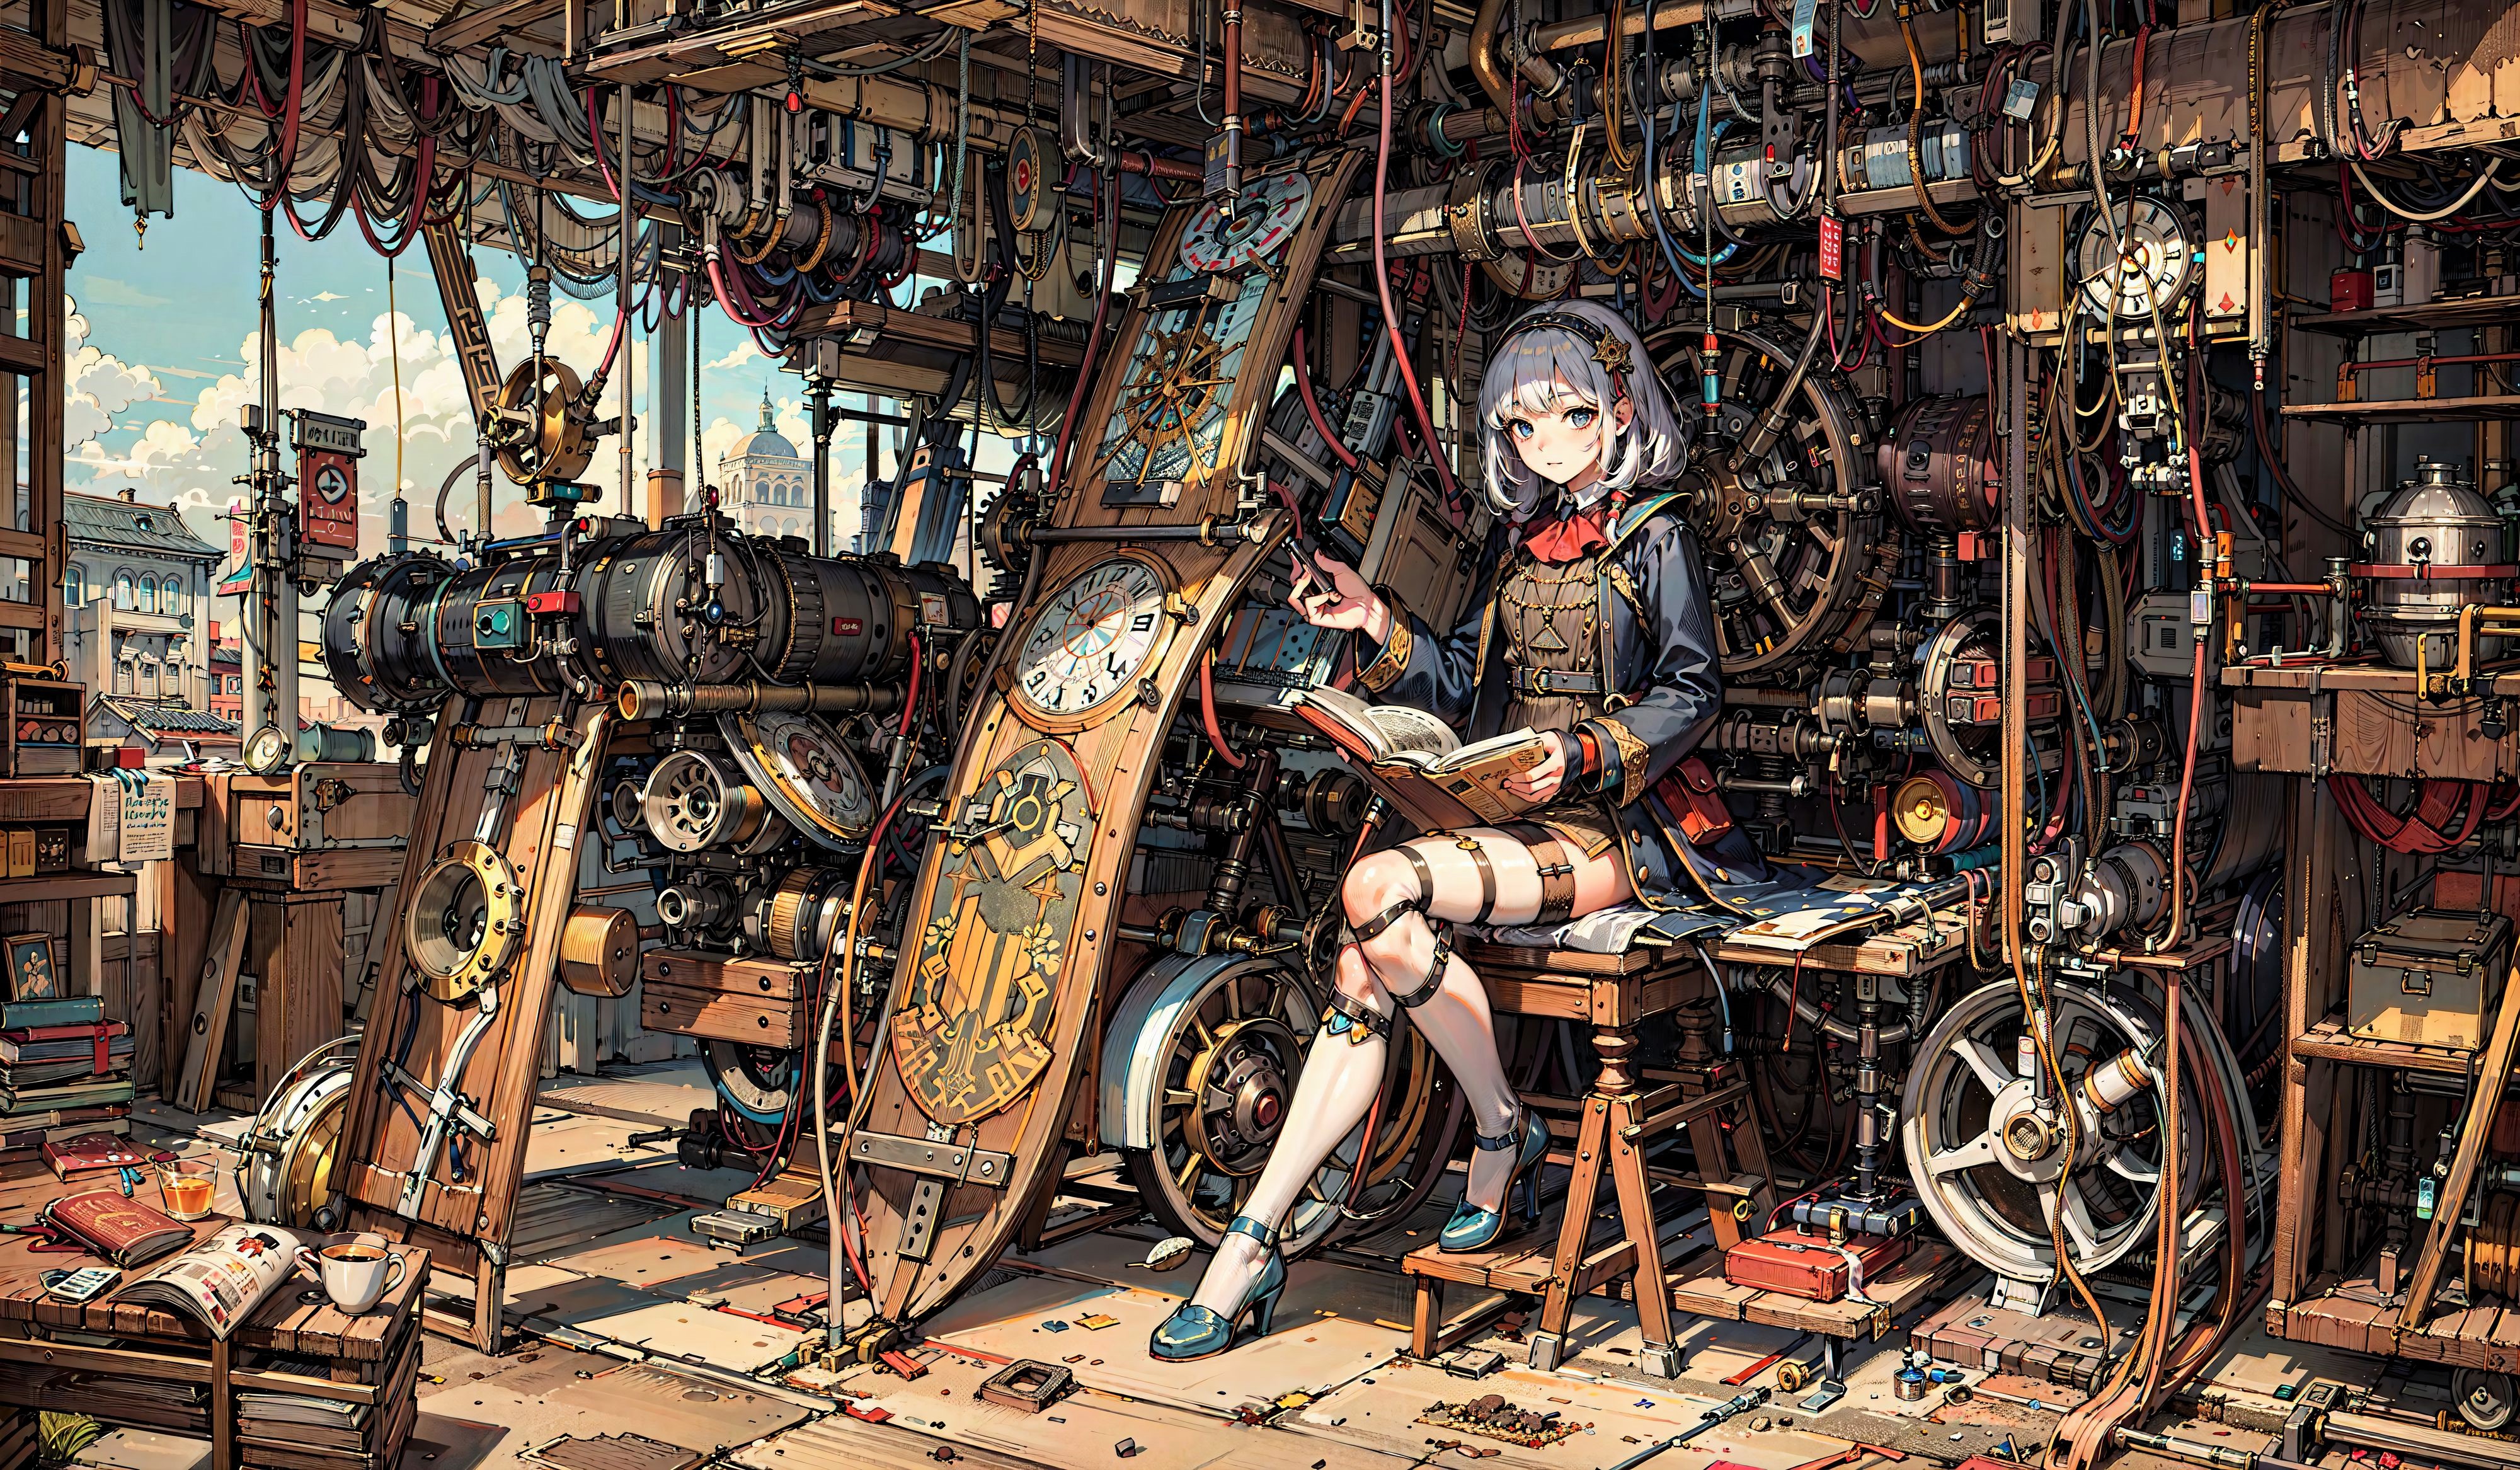 A young girl is sitting in a room surrounded by old clocks and machinery.